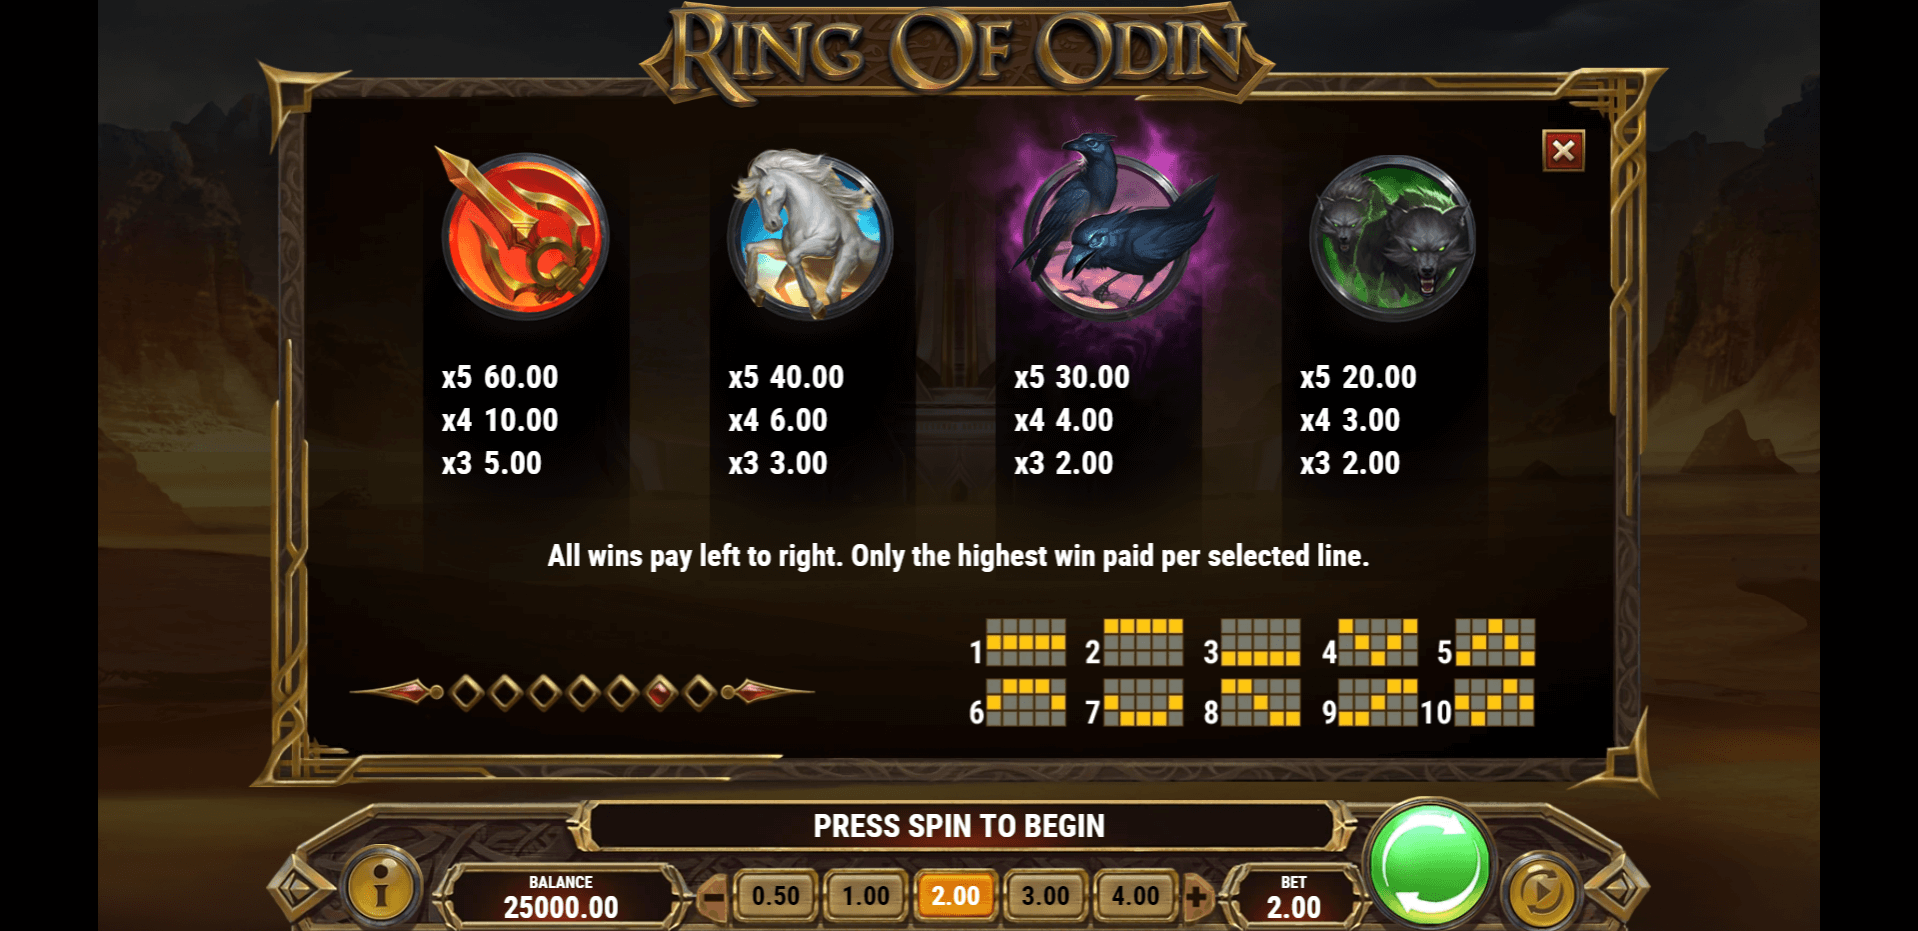 House of fun slots free spins